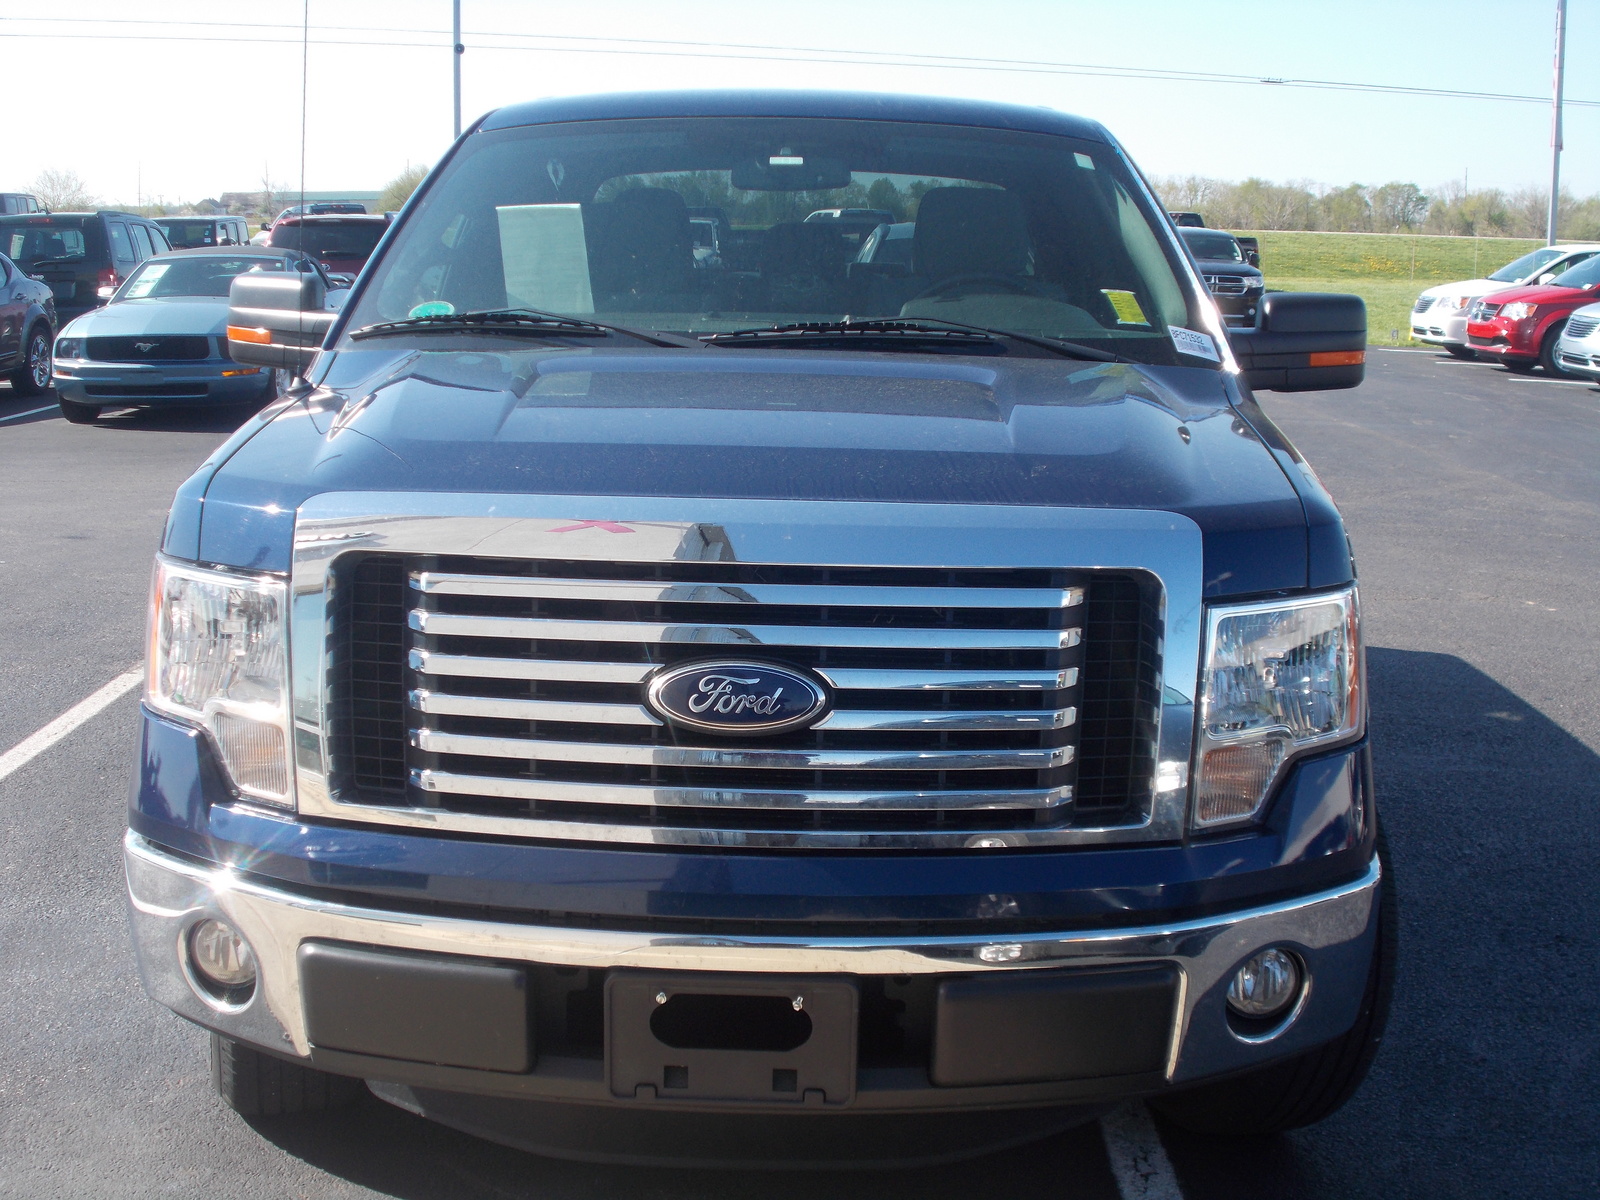 Ford f150 king ranch for sale ontario #2